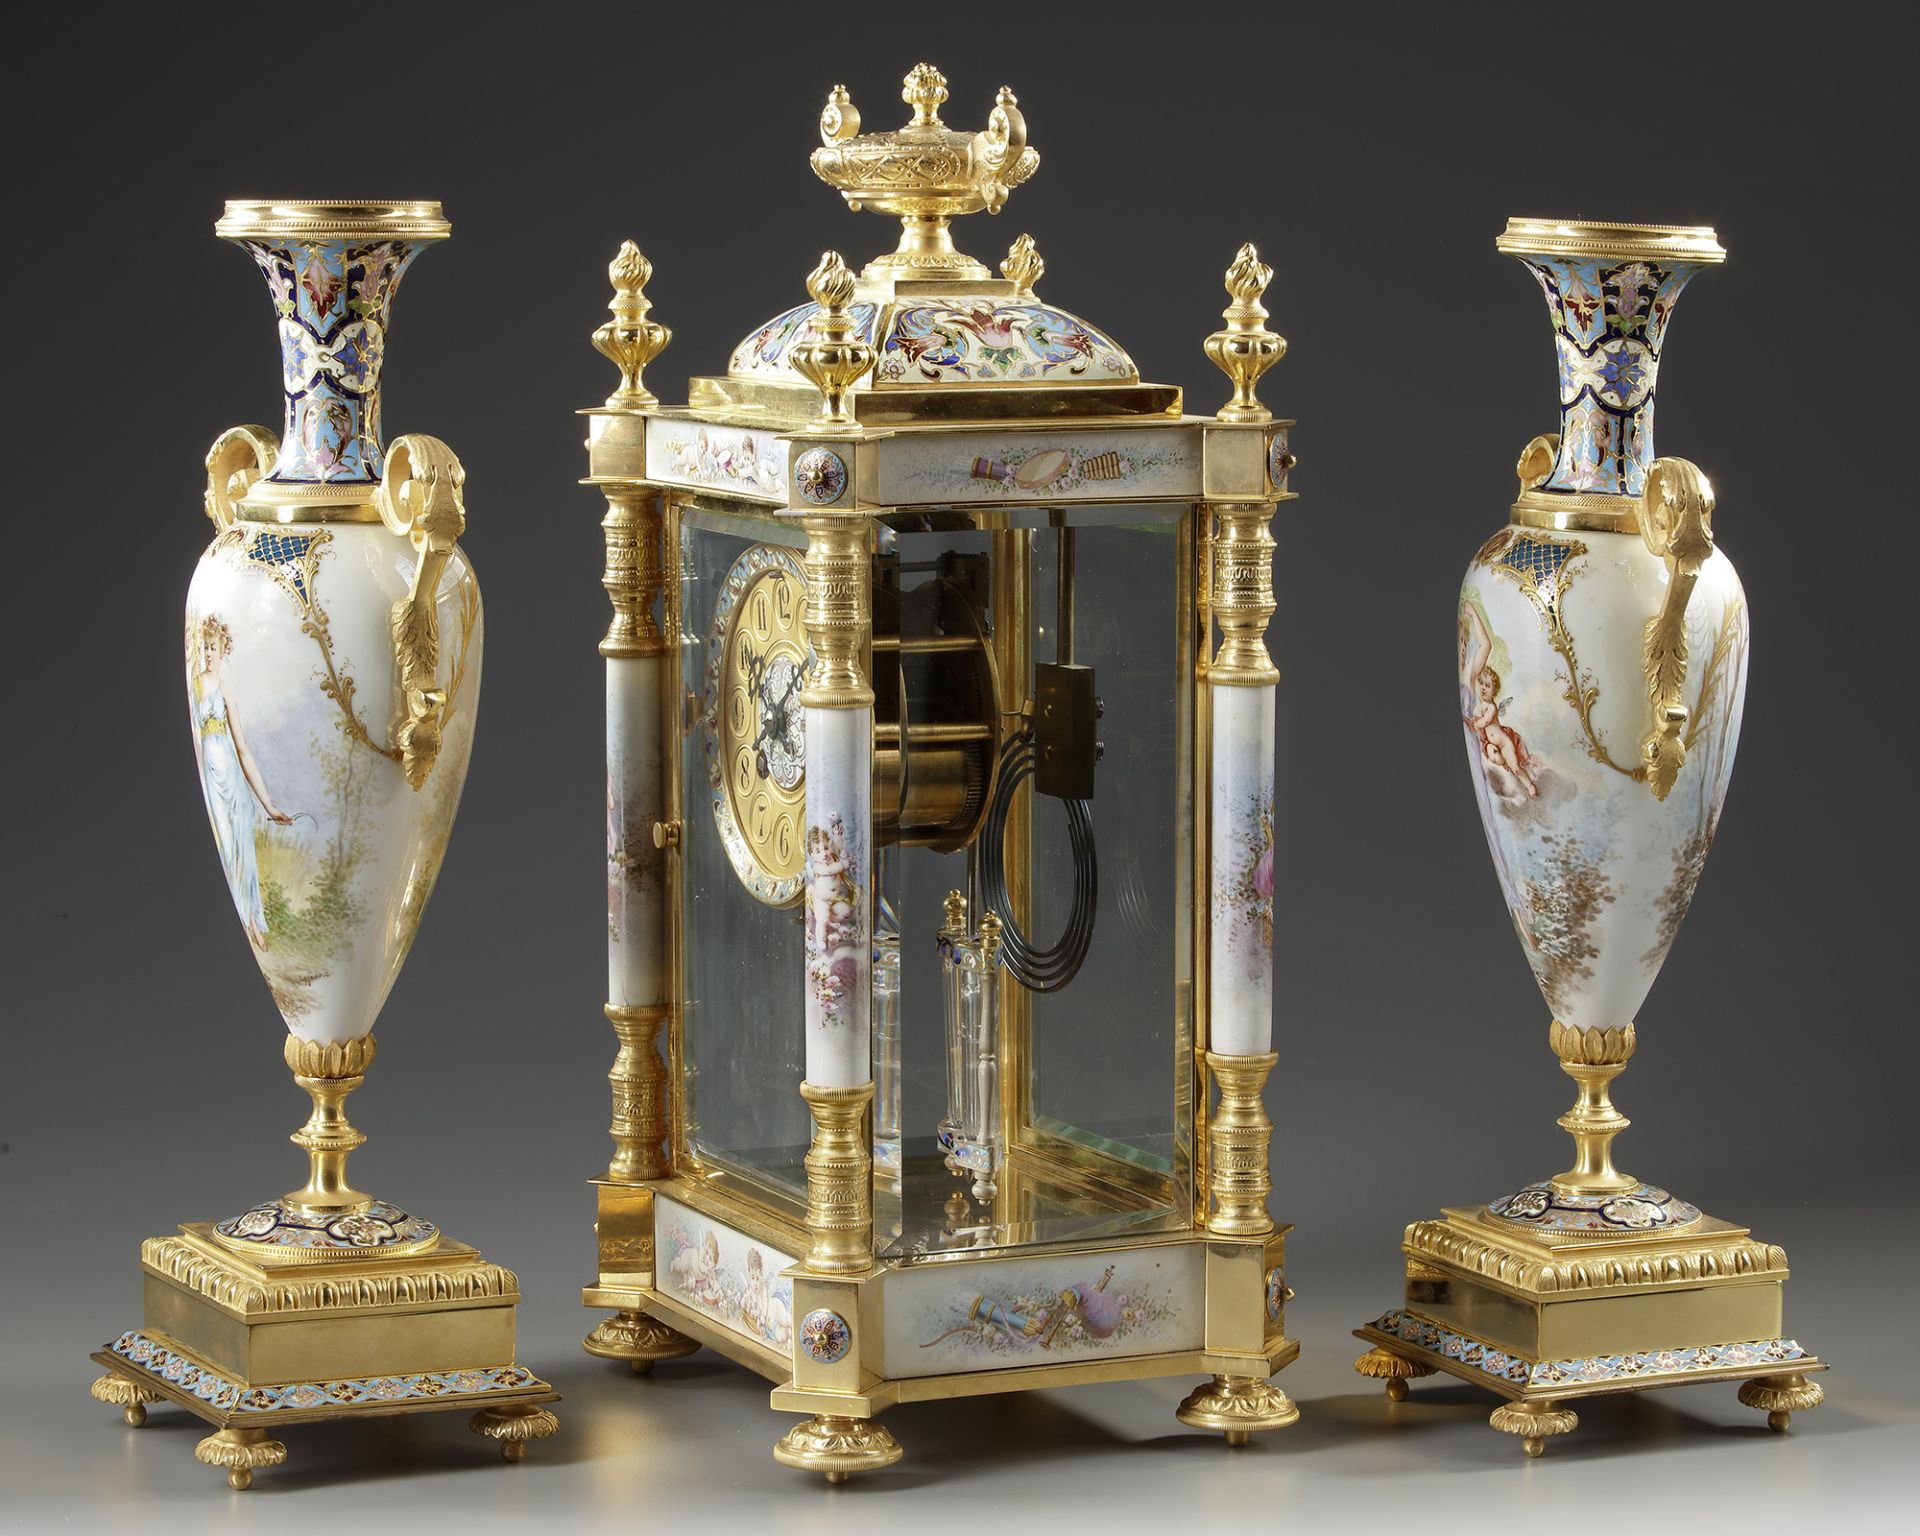 A FRENCH ORMOLU AND PORCELAIN CLOCK GARNITURE, 19TH CENTURY - Image 3 of 3